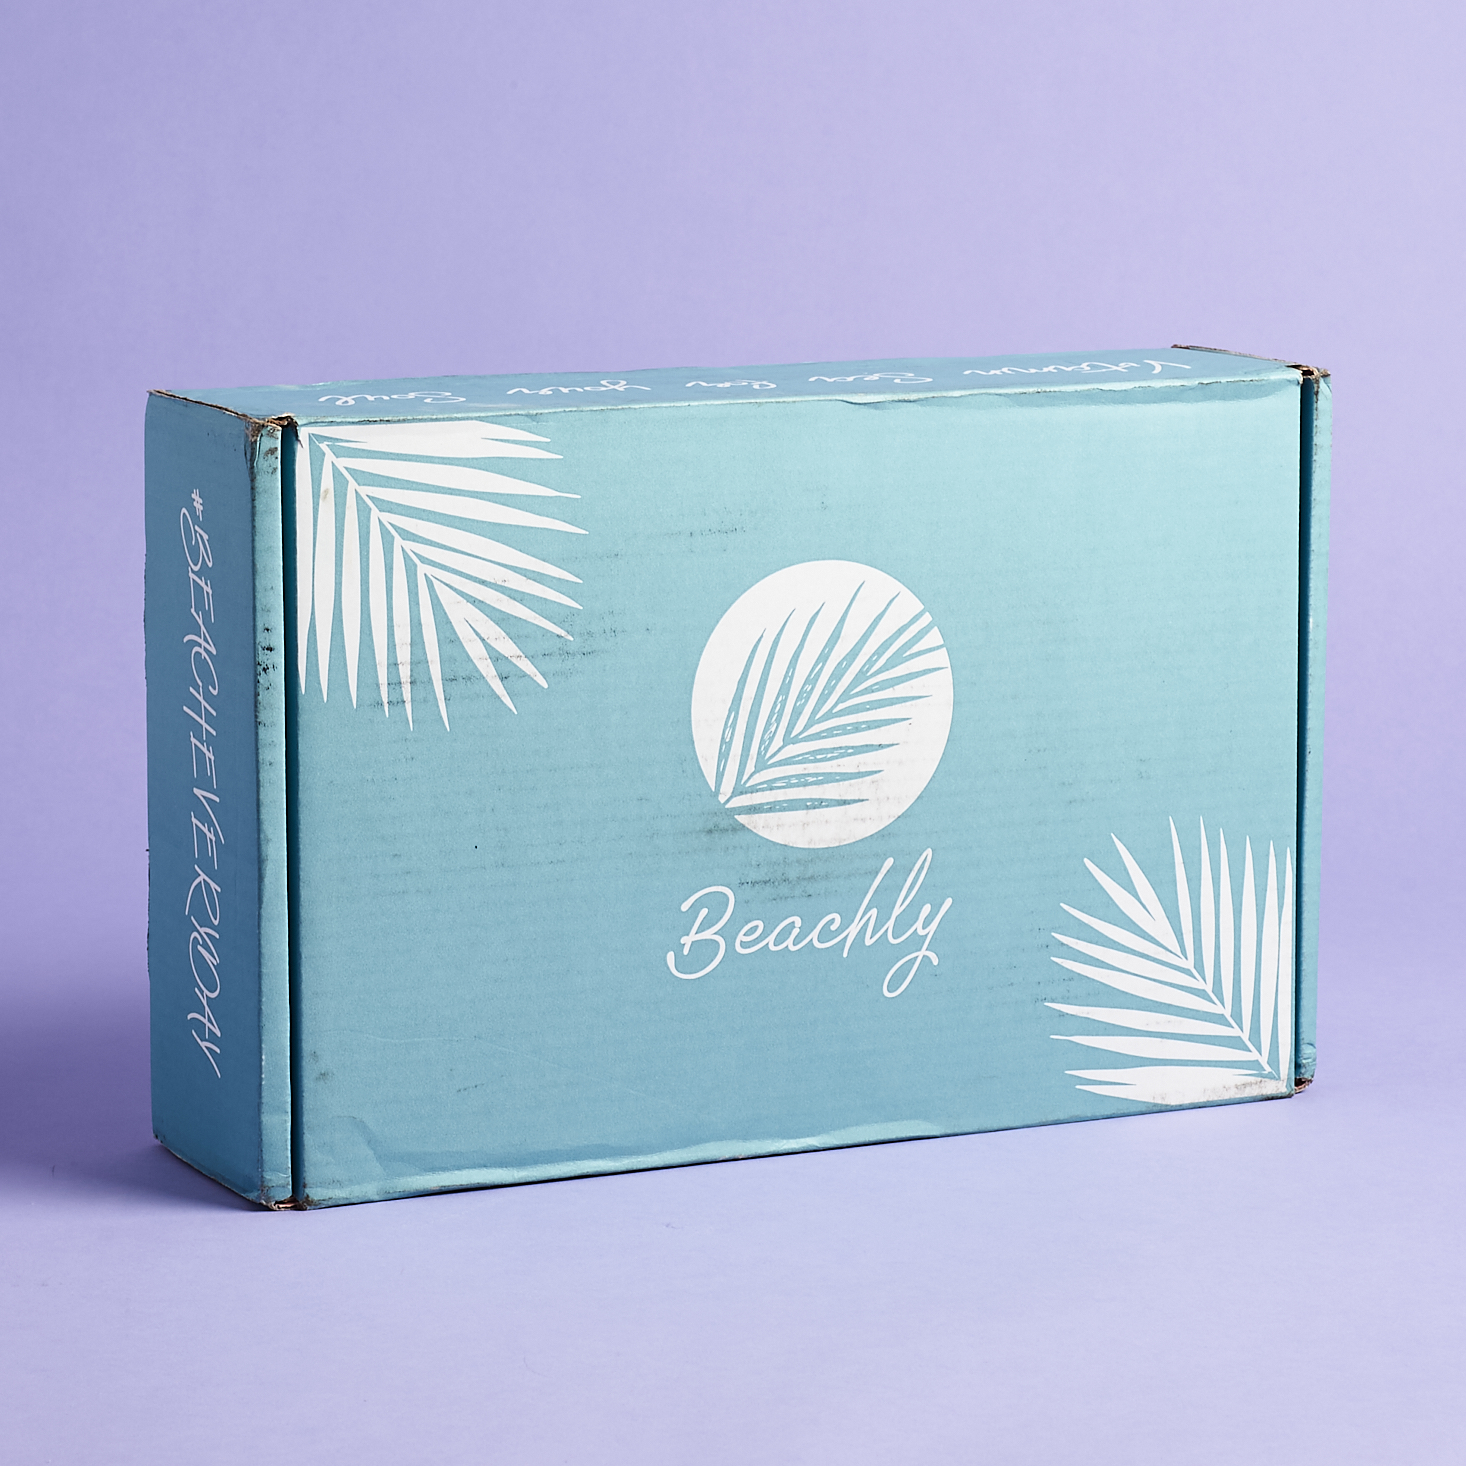 Beachly Lifestyle Box Review – Spring 2021